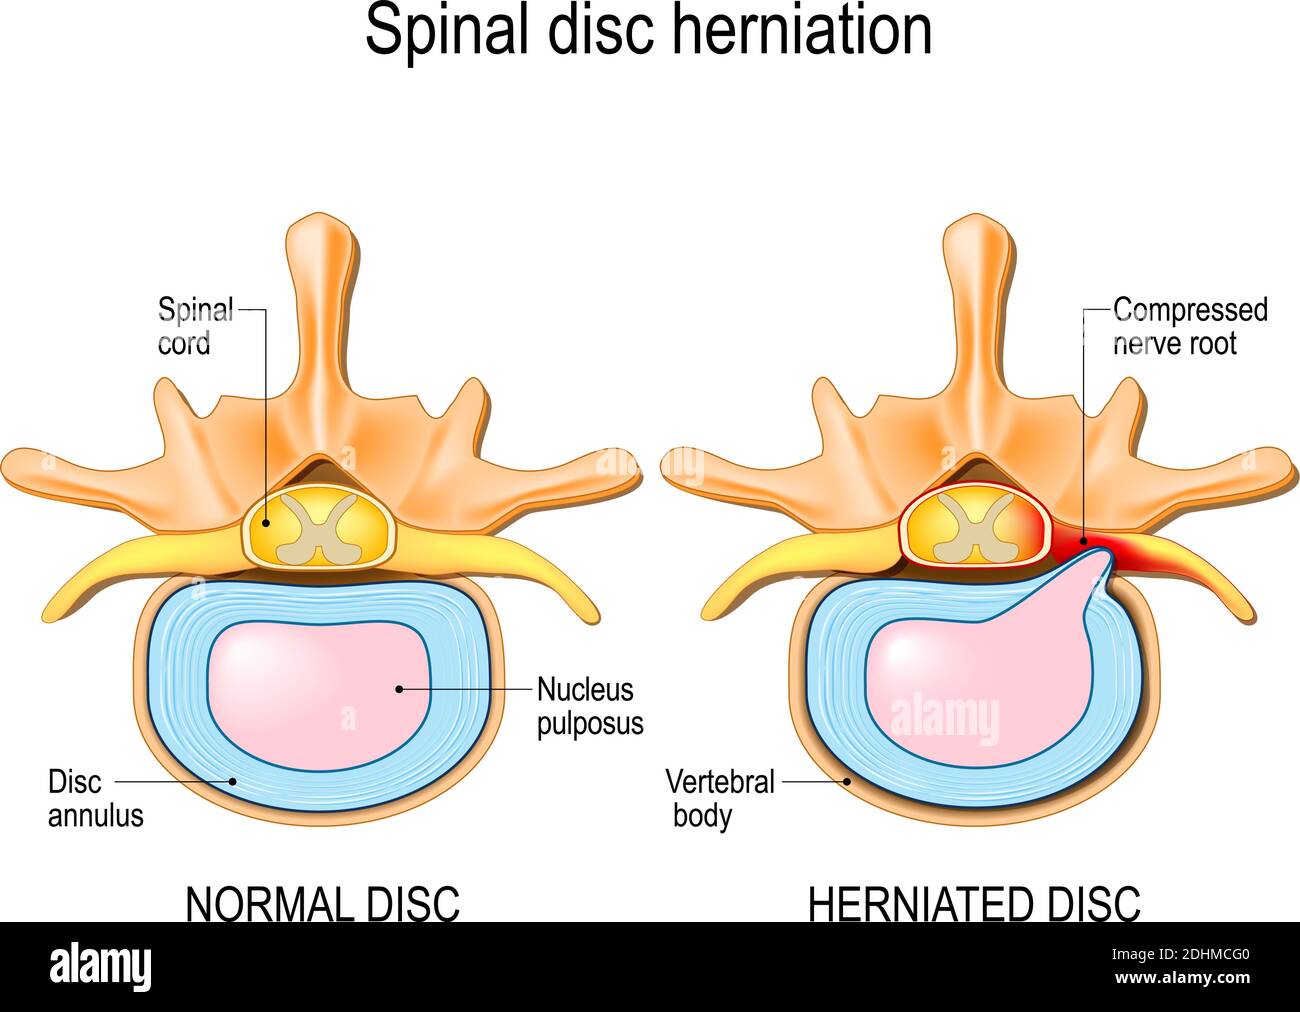 Spinal disc herniation. Back pain. Normal disc and spinal disc herniation in cervical vertebrae. Vector illustration Stock Vector